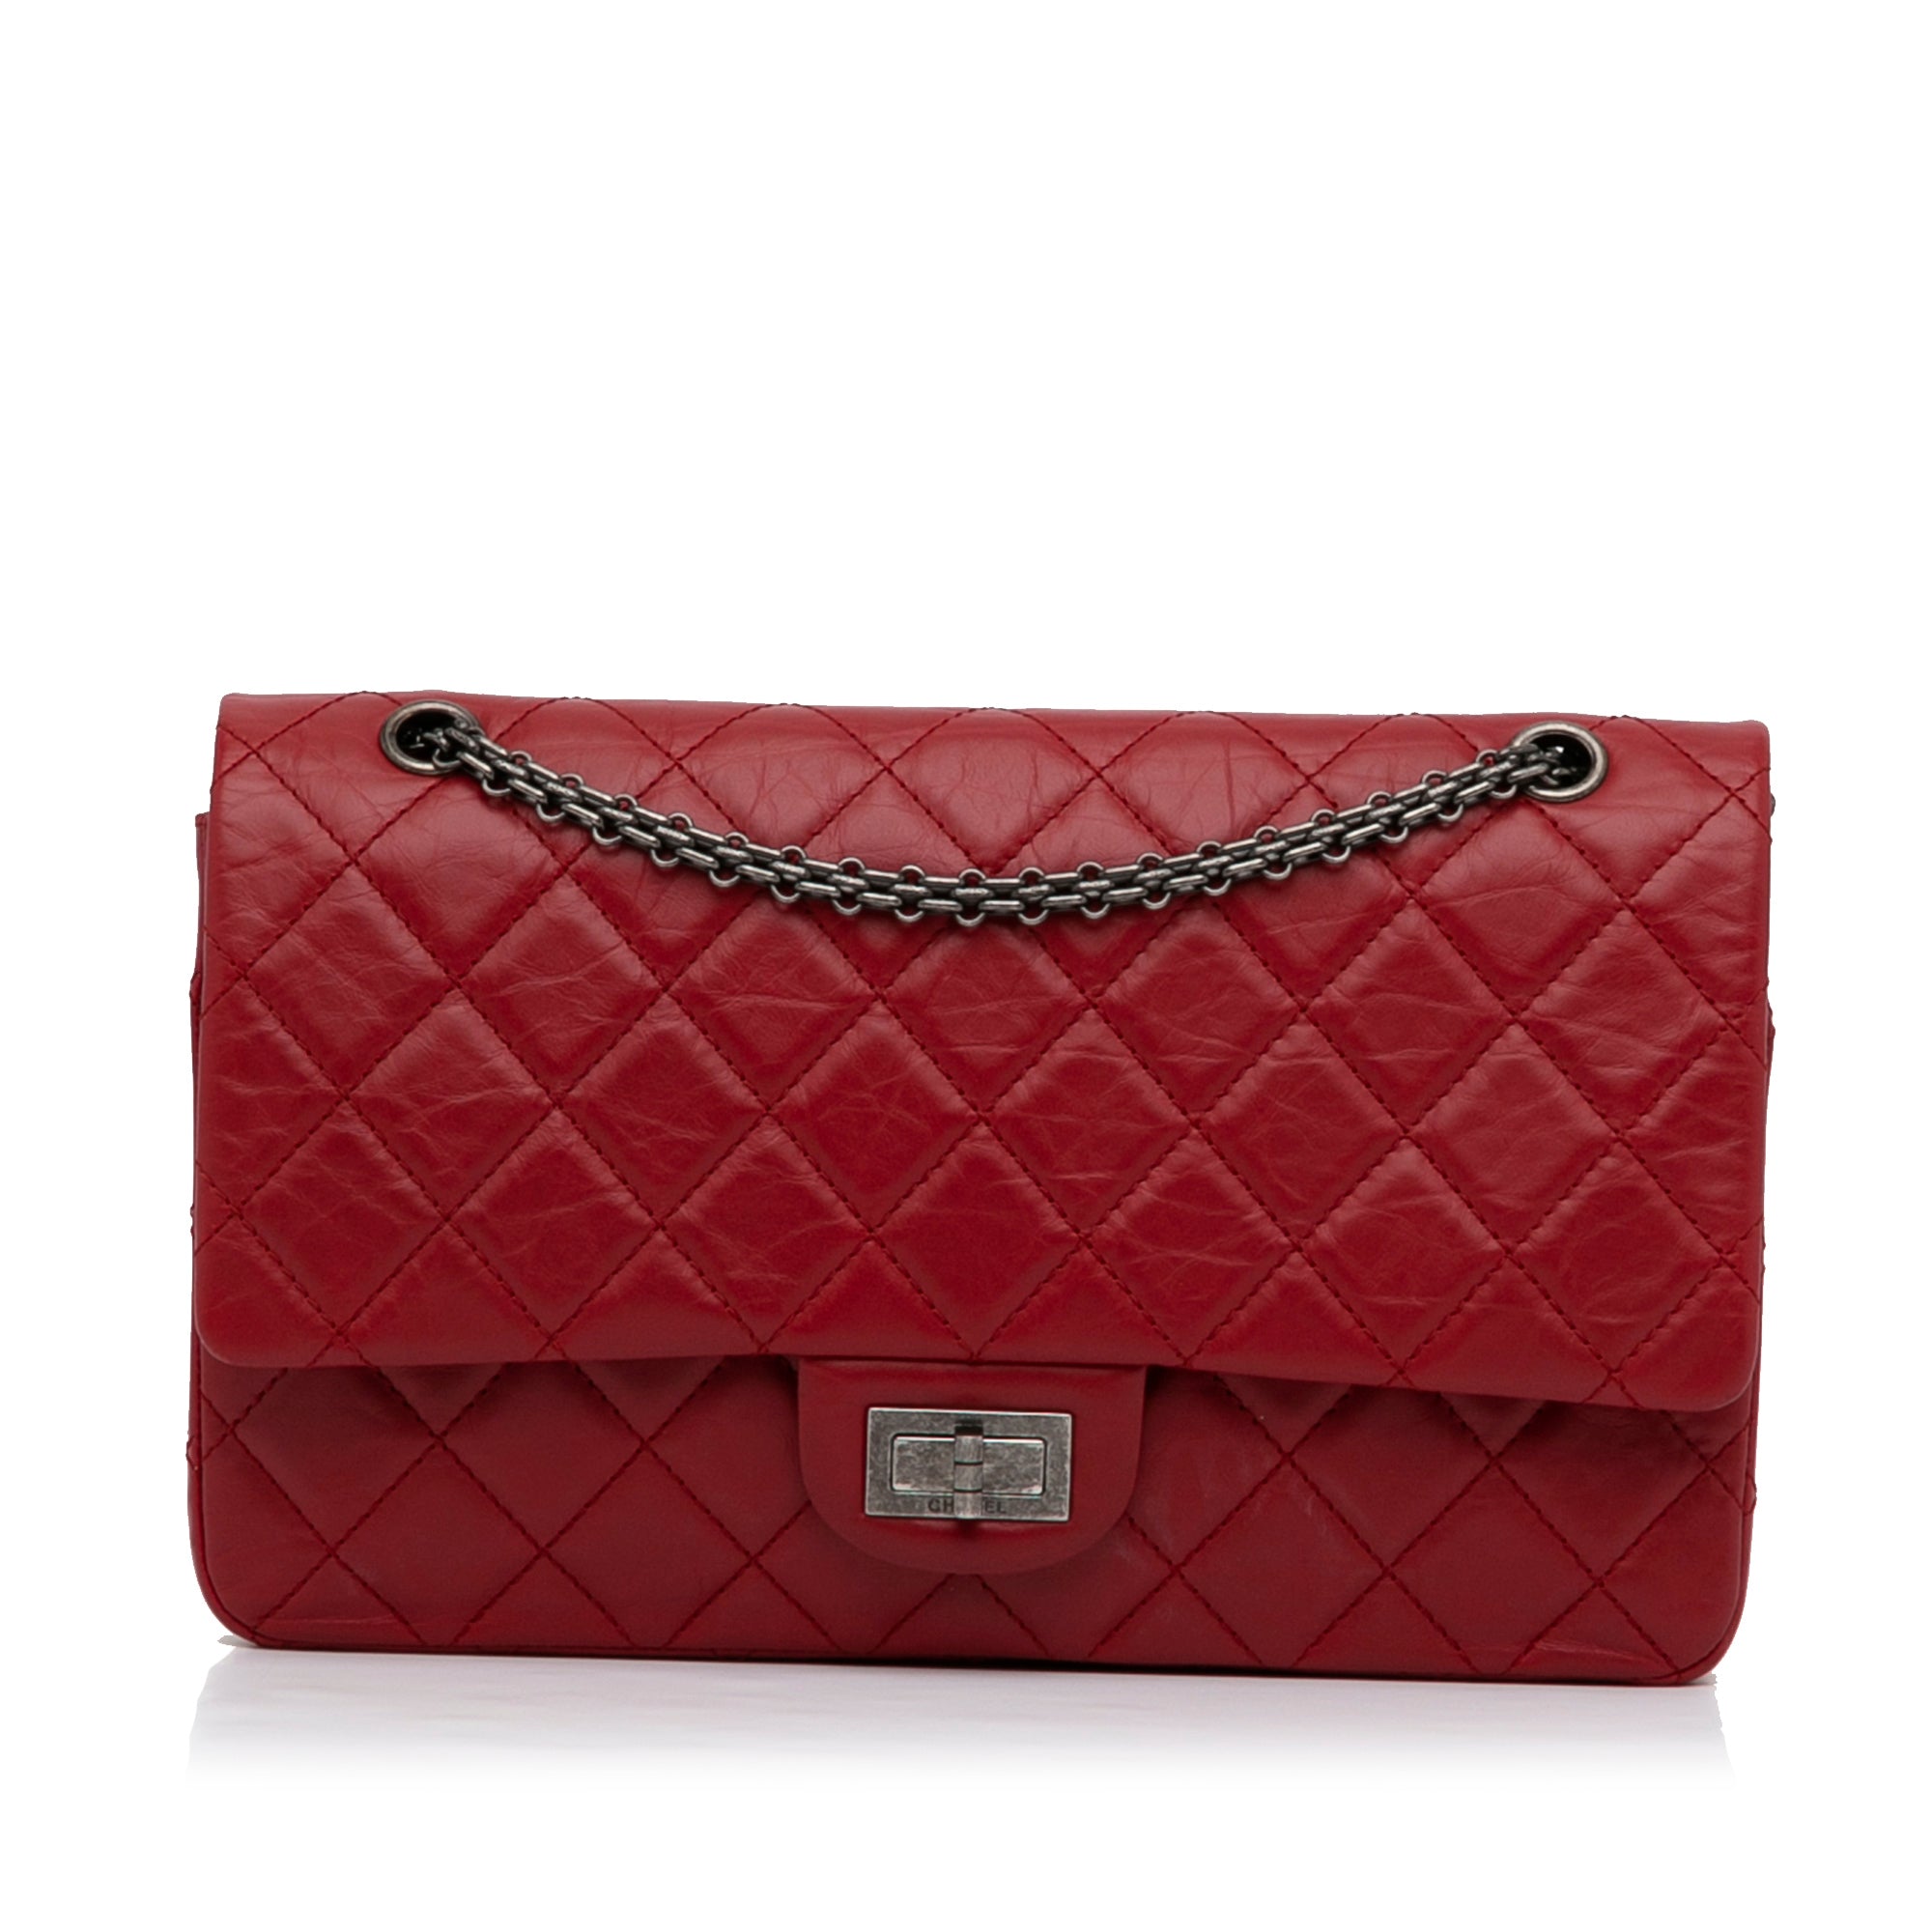 Chanel The Business Flap Bag Red - Vintage Lux